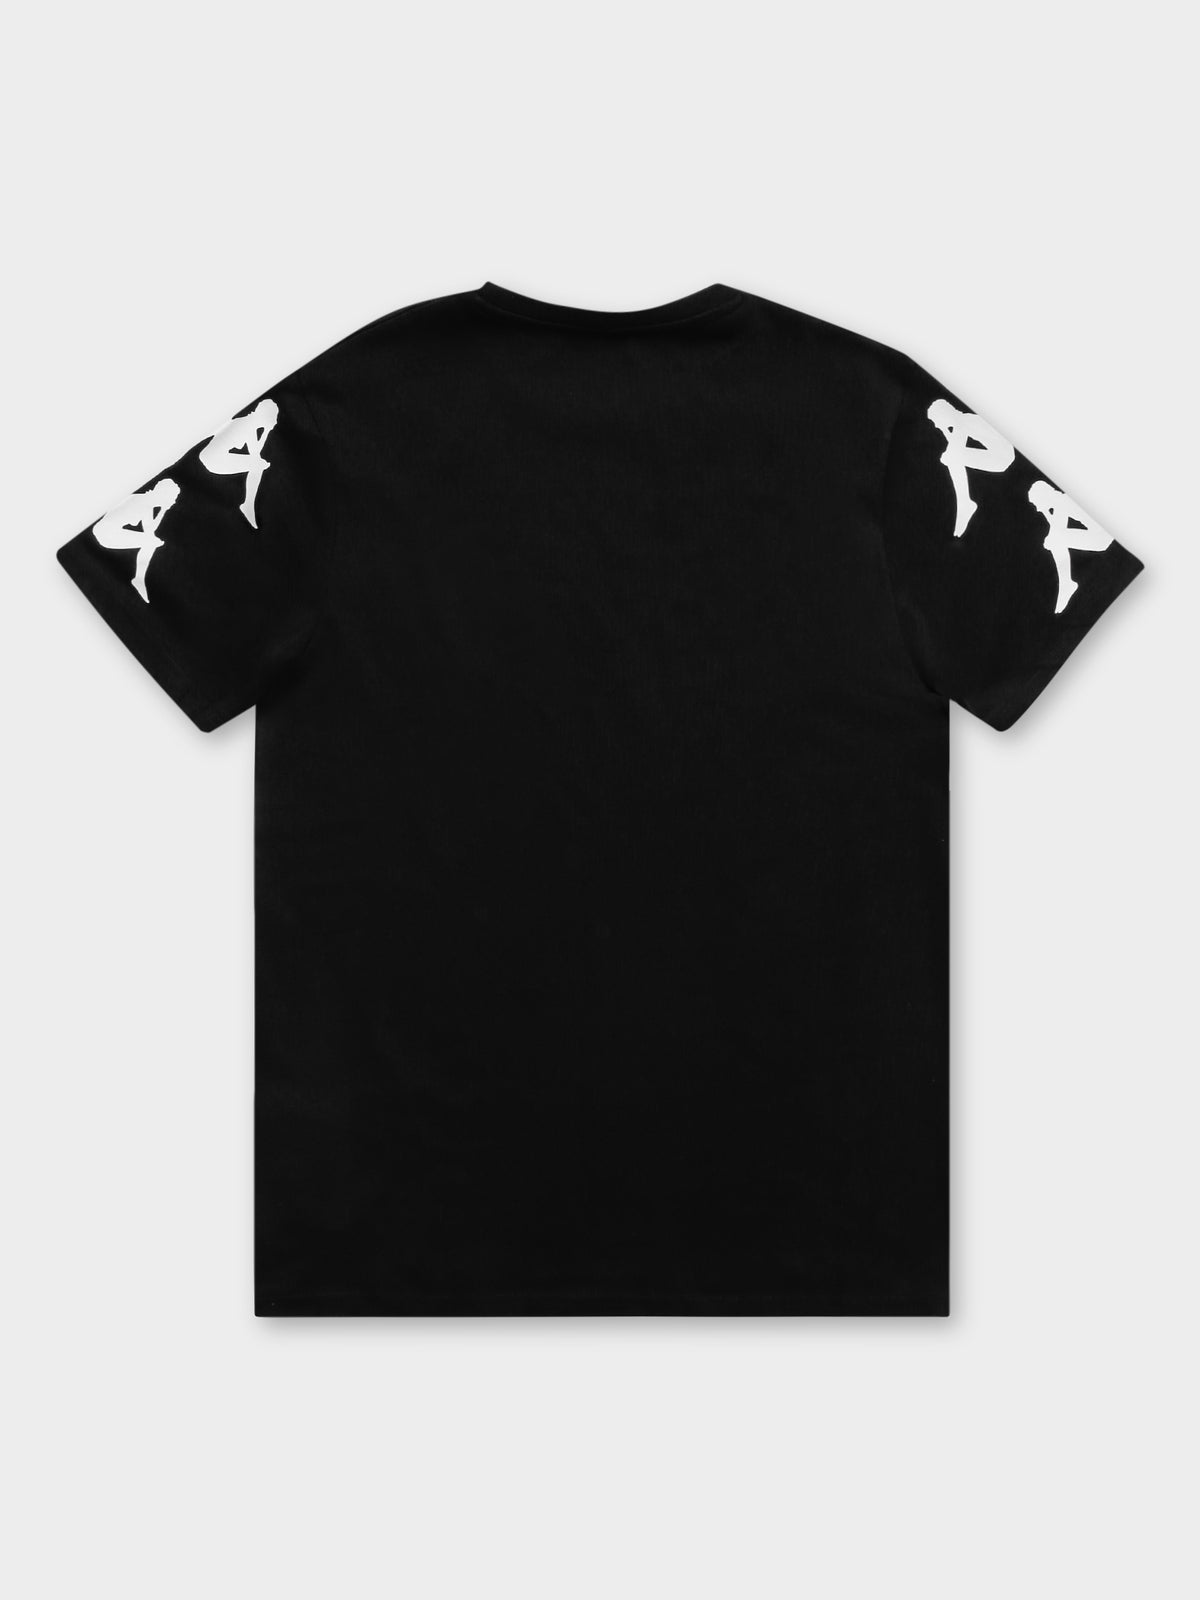 Authentic Reser T-Shirt in Black